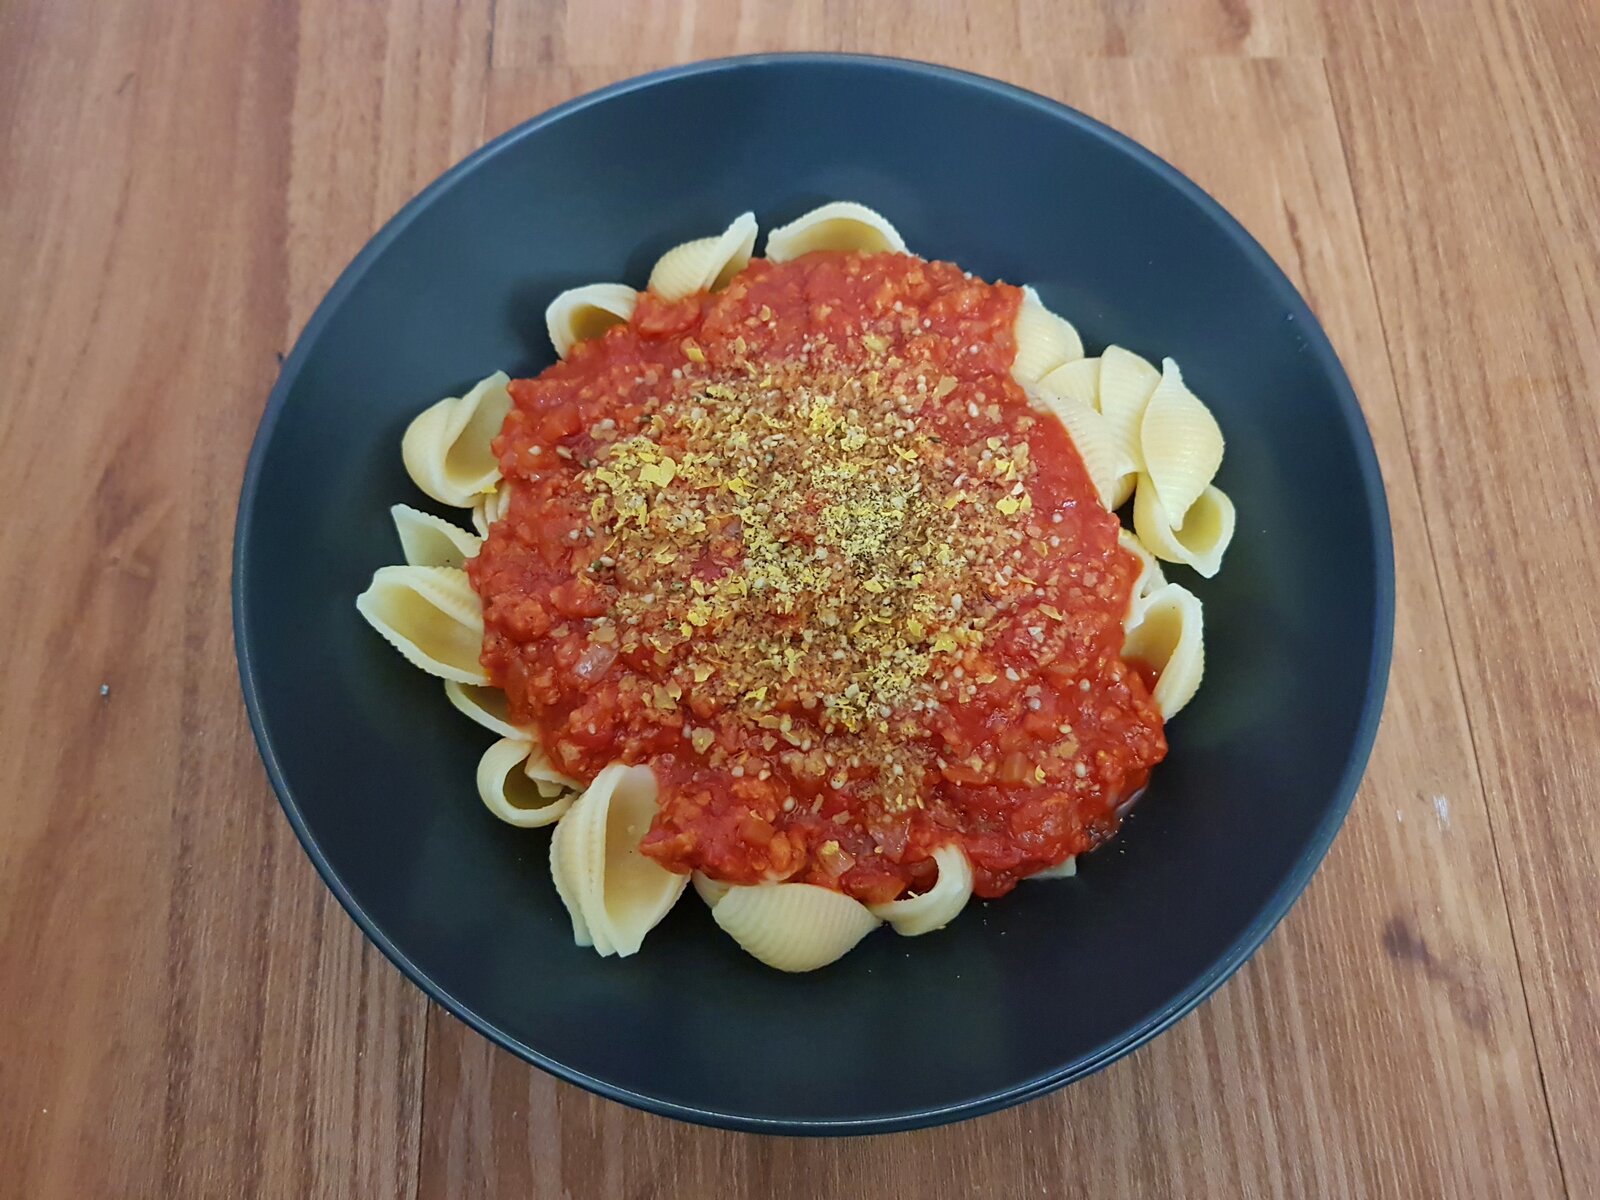 Vegan 'Spagetti' Bolognese with shells